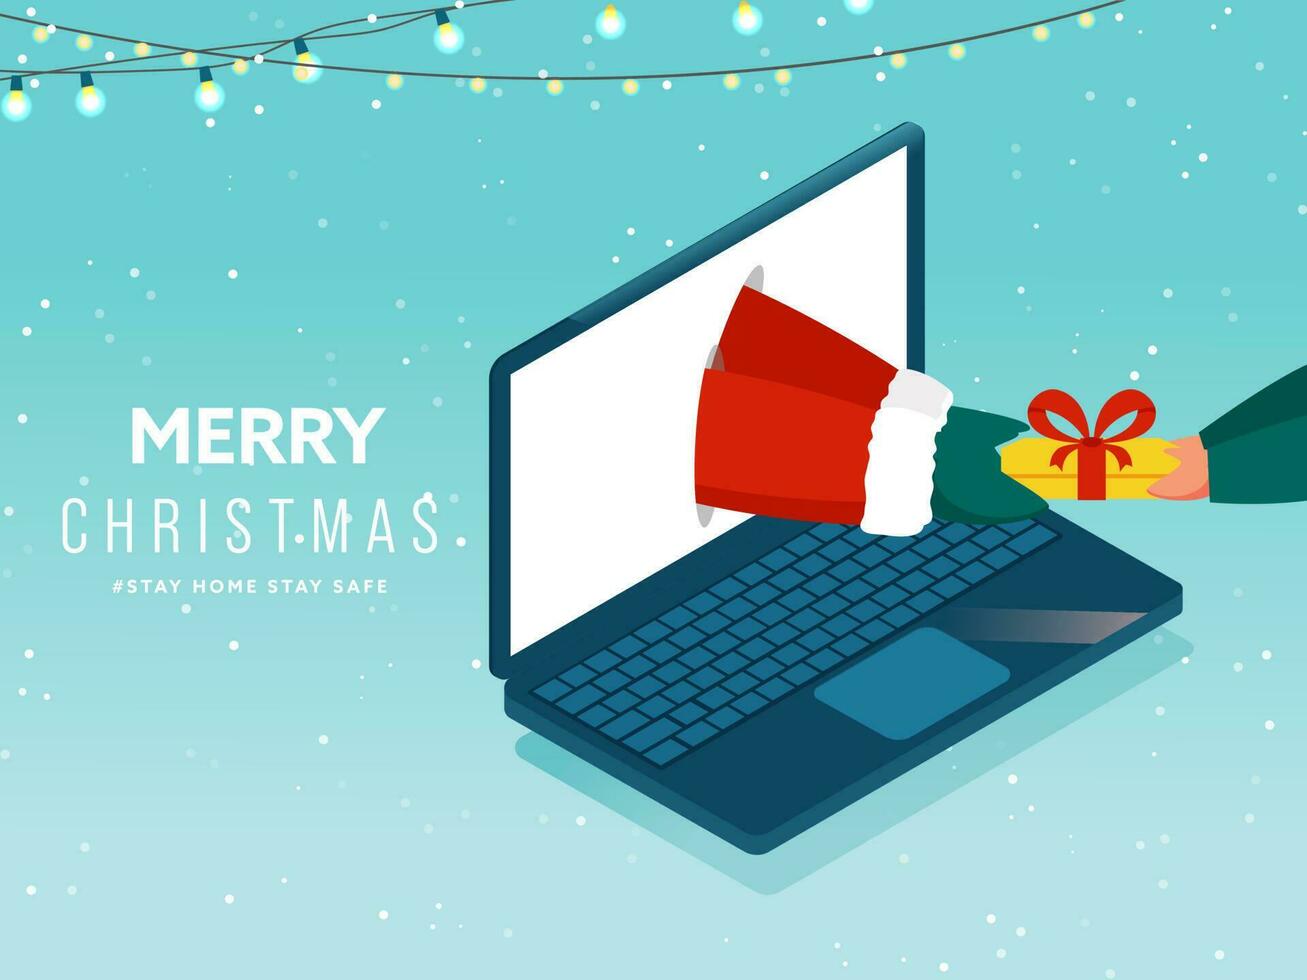 Santa Giving Gift Online To Person Through Laptop And Lighting Garland On Snowfall Blue Background For Merry Christmas, Stay Home Stay Safe. vector